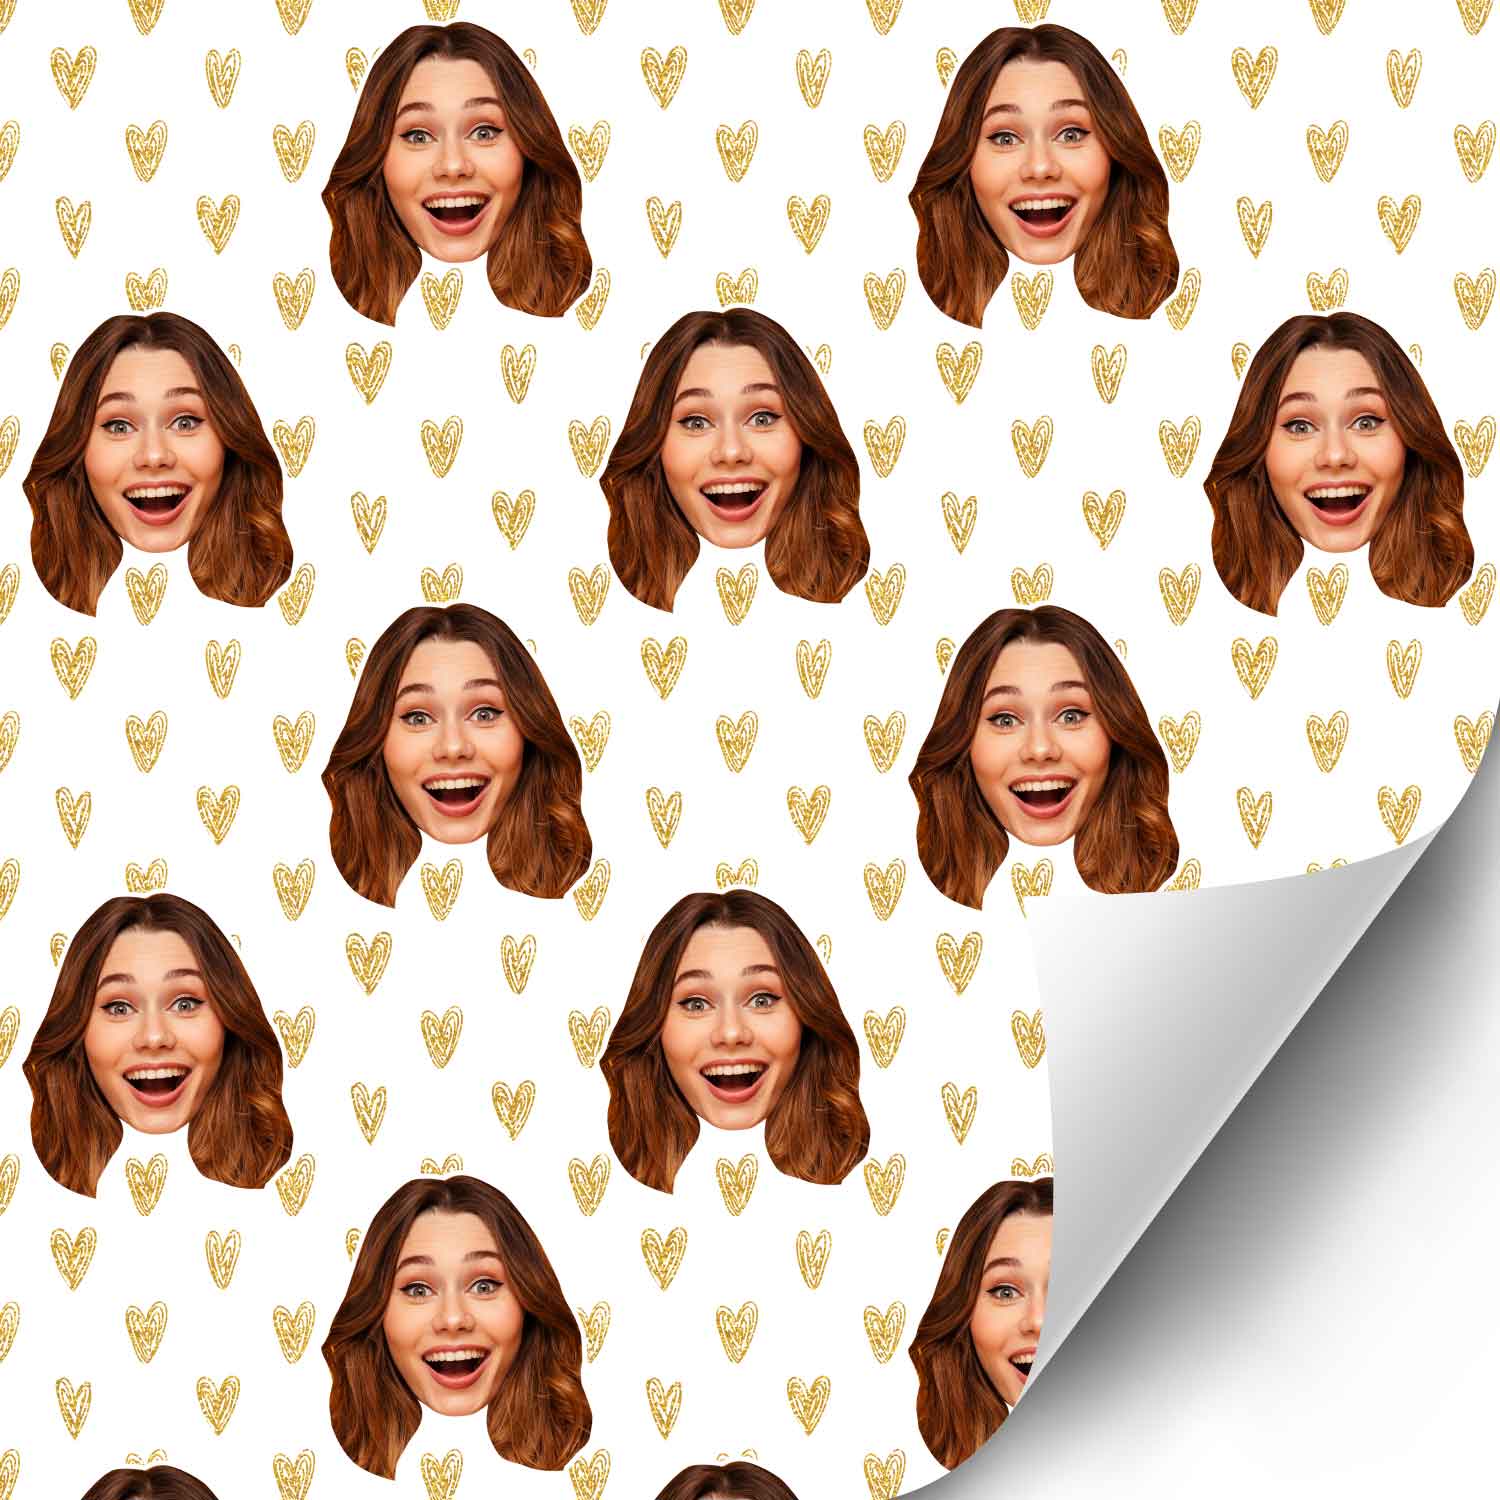 Your Face Hearts Wrapping Paper